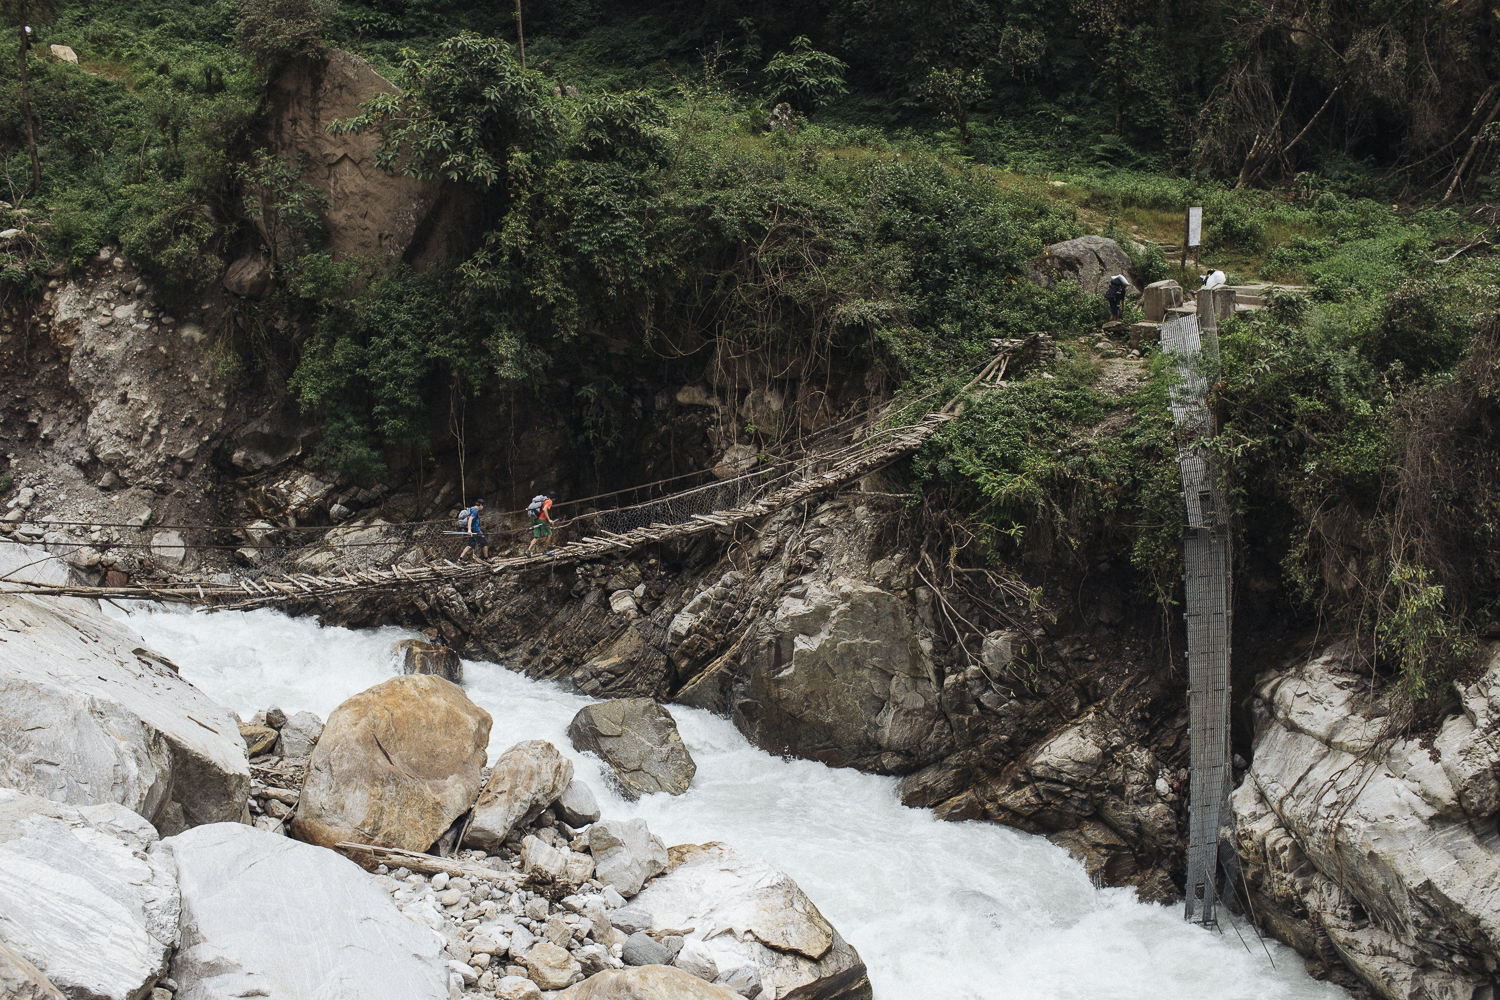 The long trek to base camp. The local people reinstalled the old bridge after the new one got swept away by a massive landslide just couple of weeks before during the heavy monsoon rain of [the 2016] season, wrote Hansjorg Auer. [Photo] Elias Holzkenecht